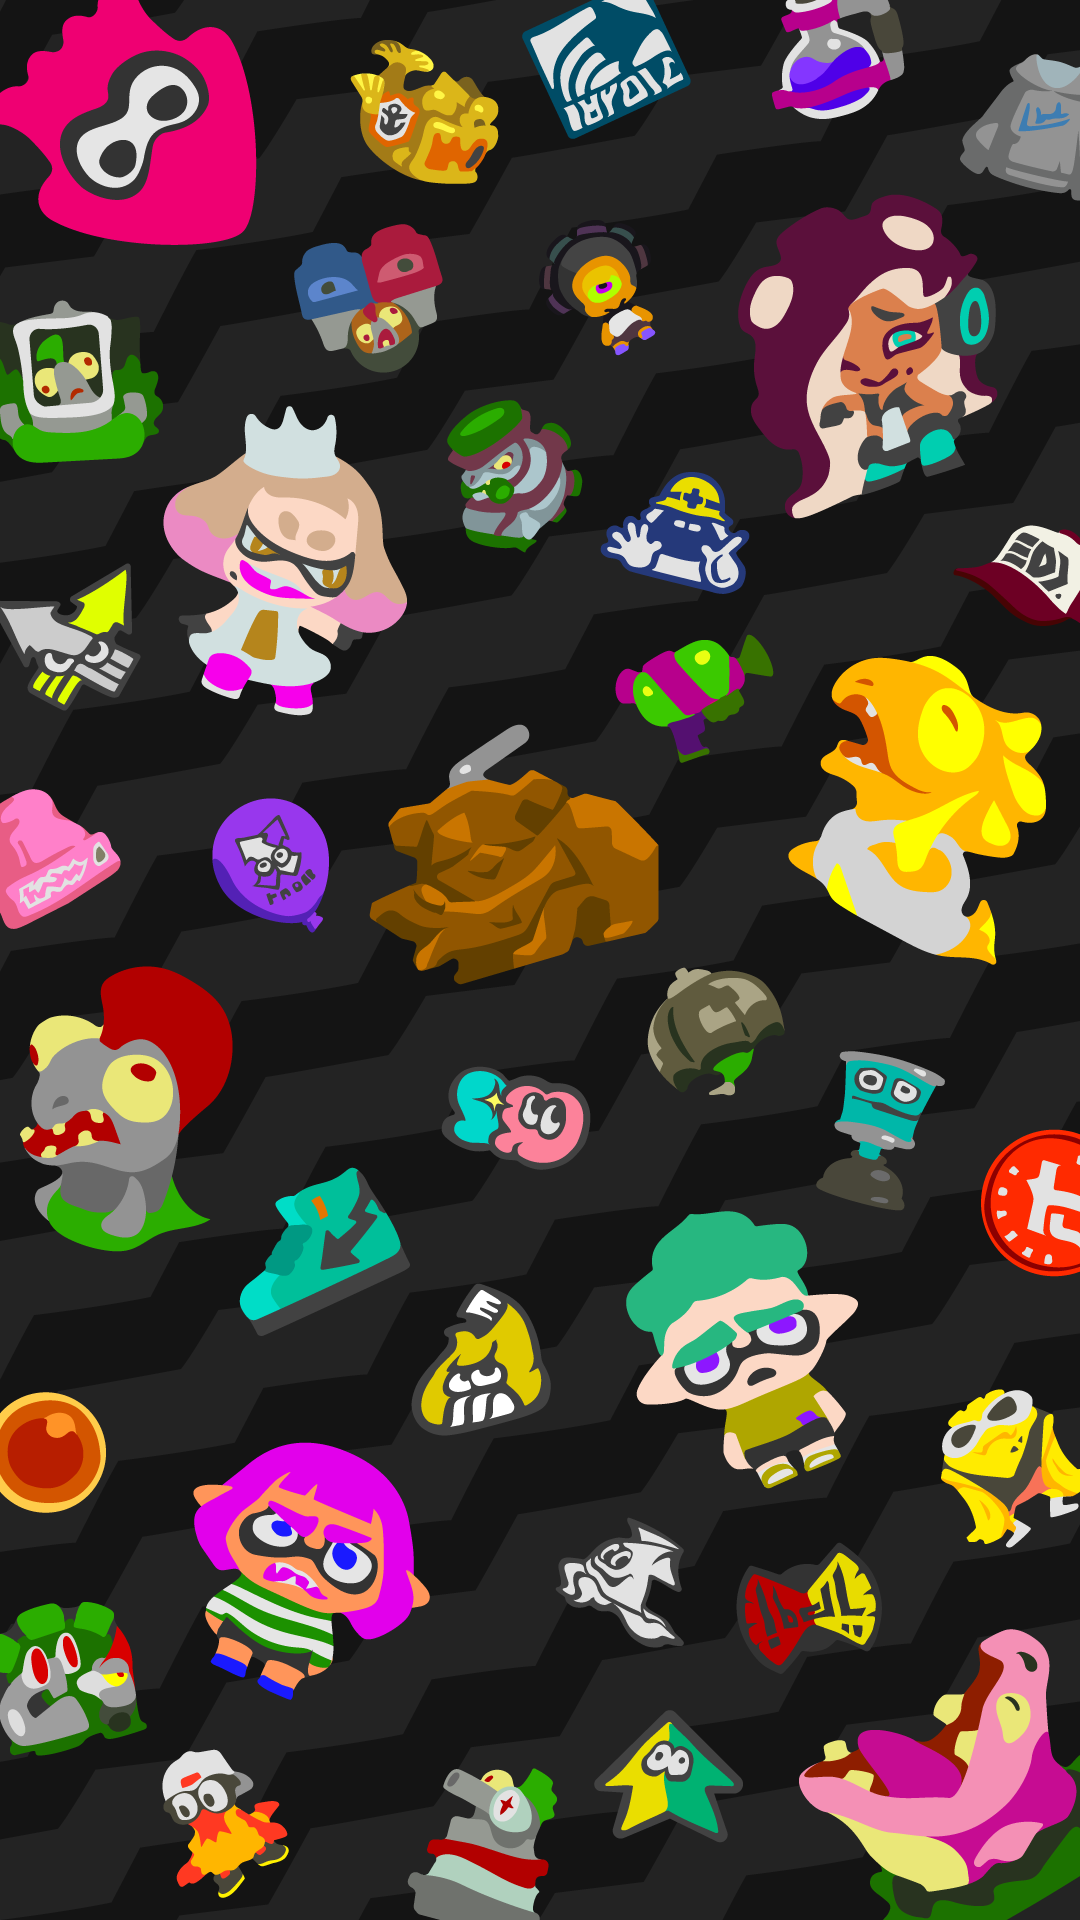 Splatnet2 Gave Out A Phone Background 1080x19 I Made A 19x1080 Version For Desktop If You Guys Want It I Didn T Just Rotate It That Would Look Bad R Splatoon